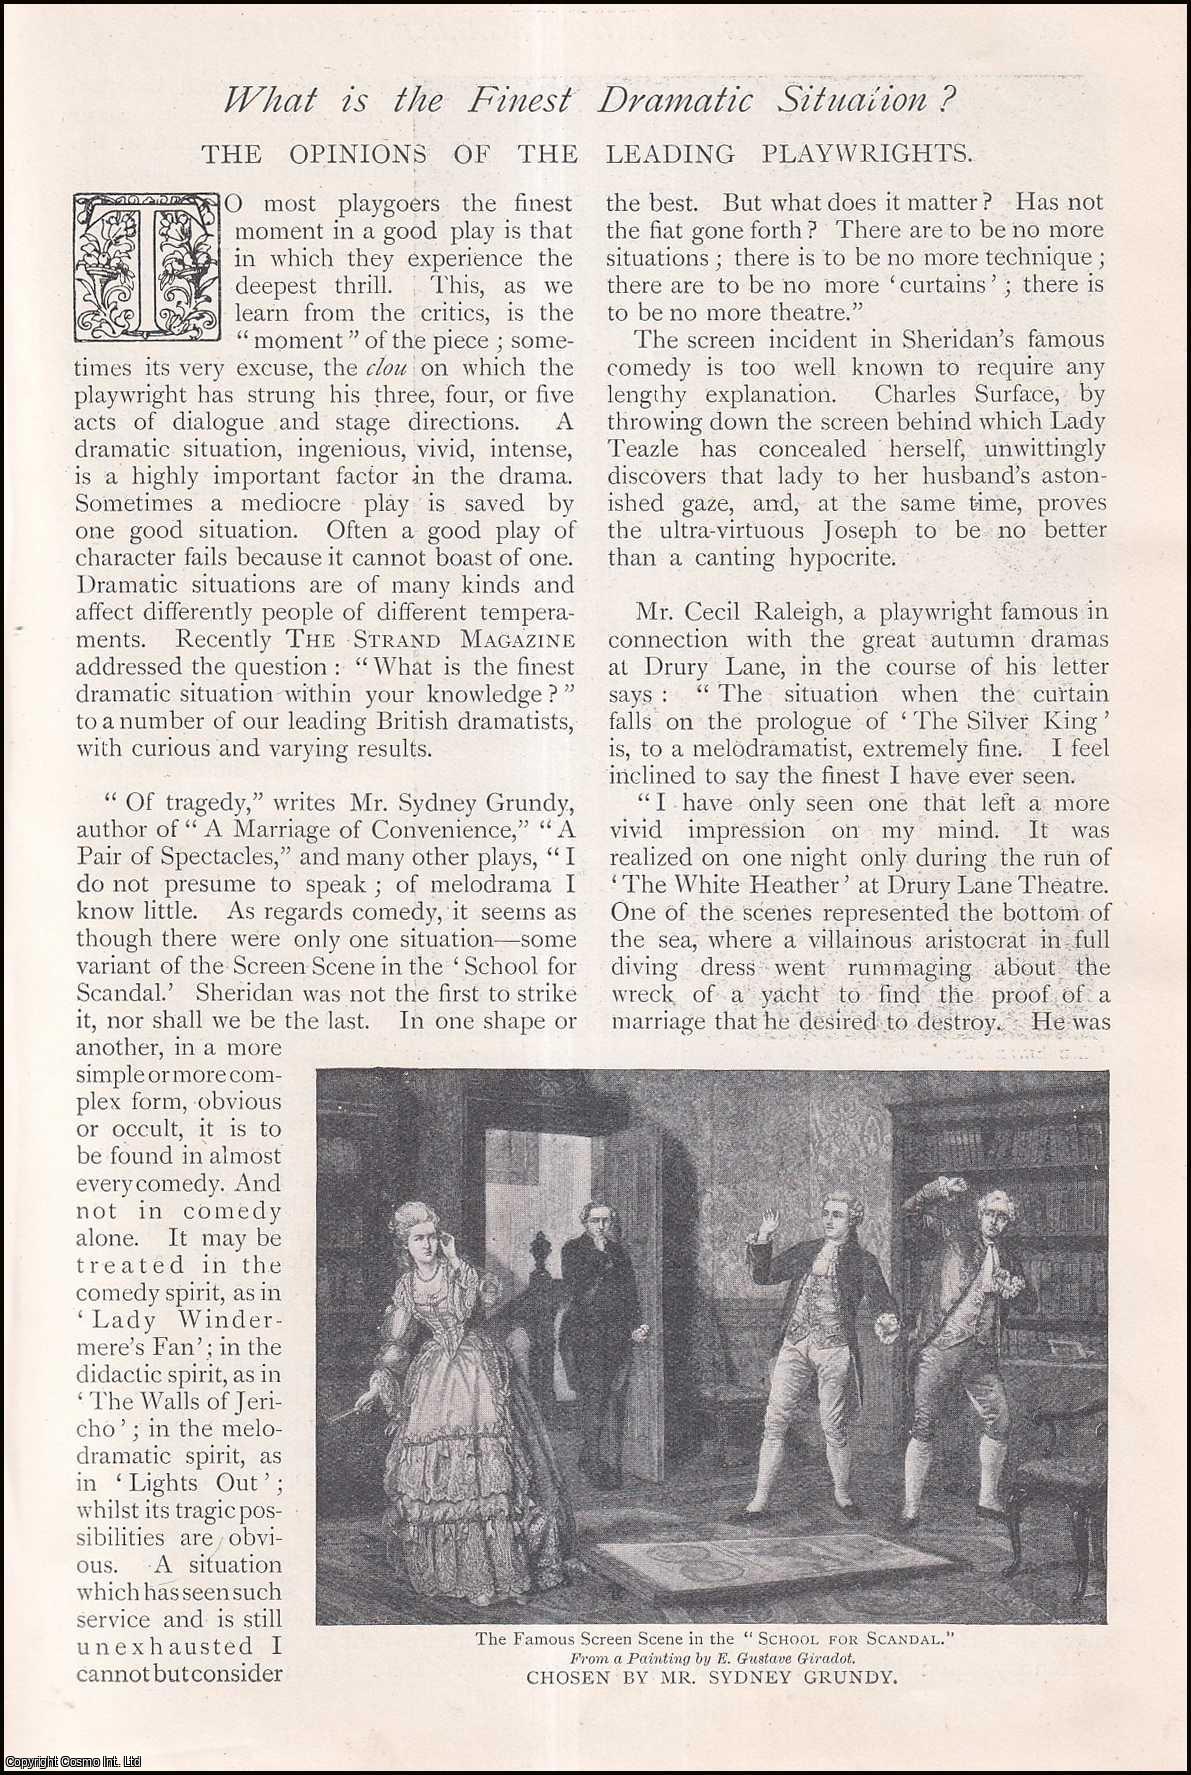 No Author Stated - What is the Finest Dramatic Situation ? The Opinions of the Leading Playwrights. The Princess & the Butterfly ; the Silver King ; the Merchant of Venice & more. An uncommon original article from The Strand Magazine, 1906.